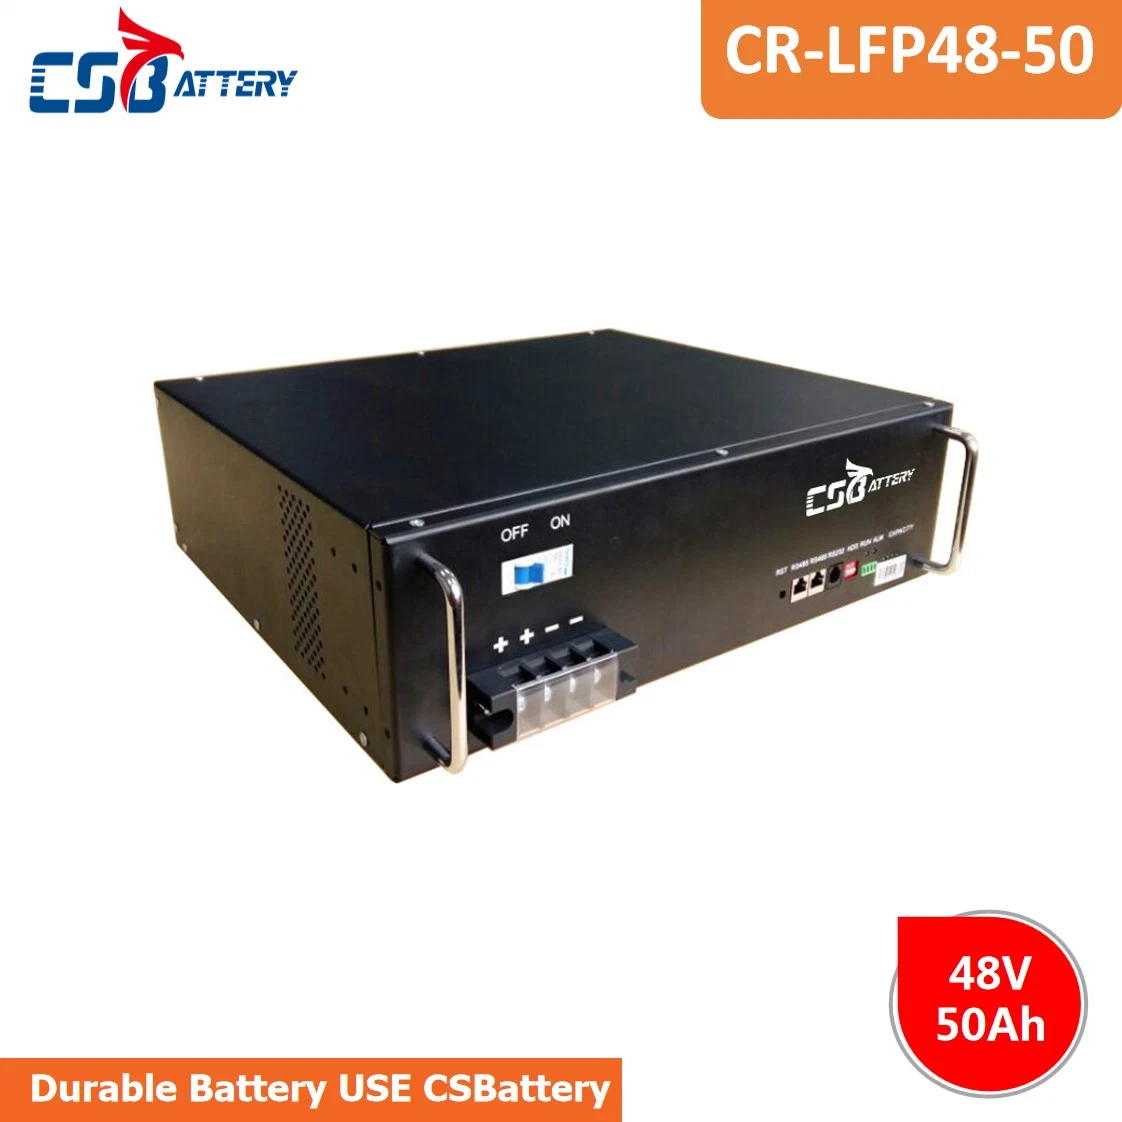 Csbattery 48V50ah 19inch Size Long Life LiFePO4 Lithium Ion Phosphate Battery Pack for Data-Center/Bts-System/Boo